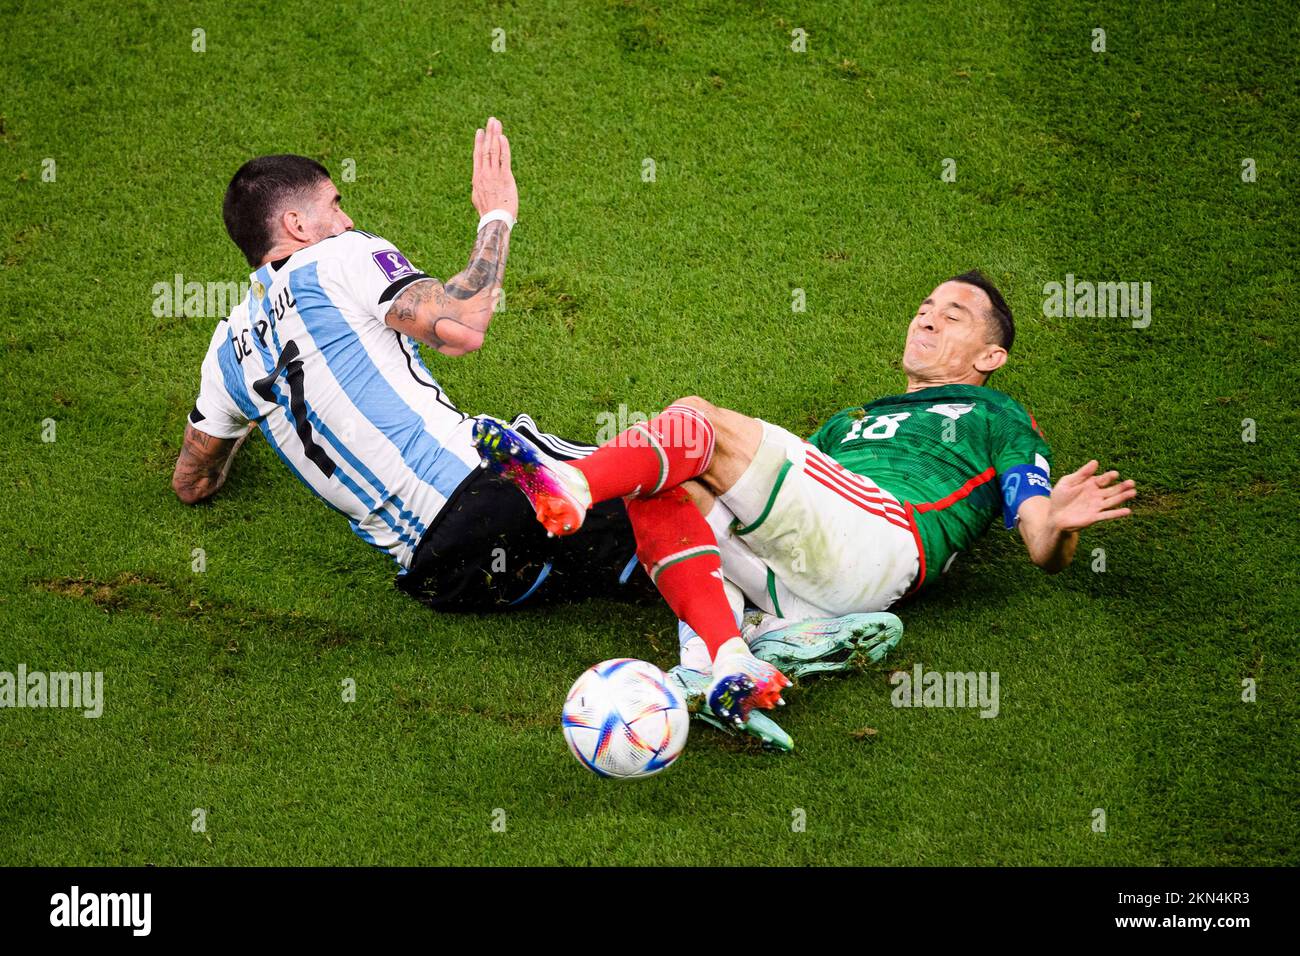 Lusail, Qatar. 14th Sep, 2022. Lusail, Qatar, Nov 26th 2022: Rodrigo De Paul of Argentina and Andres Guardado of Mexico during a match between Argentina vs Mexico, valid for the group stage of the World Cup, held at the Estadio Nacional de Lusail in Lusail, Qatar. (Marcio Machado/SPP) Credit: SPP Sport Press Photo. /Alamy Live News Stock Photo